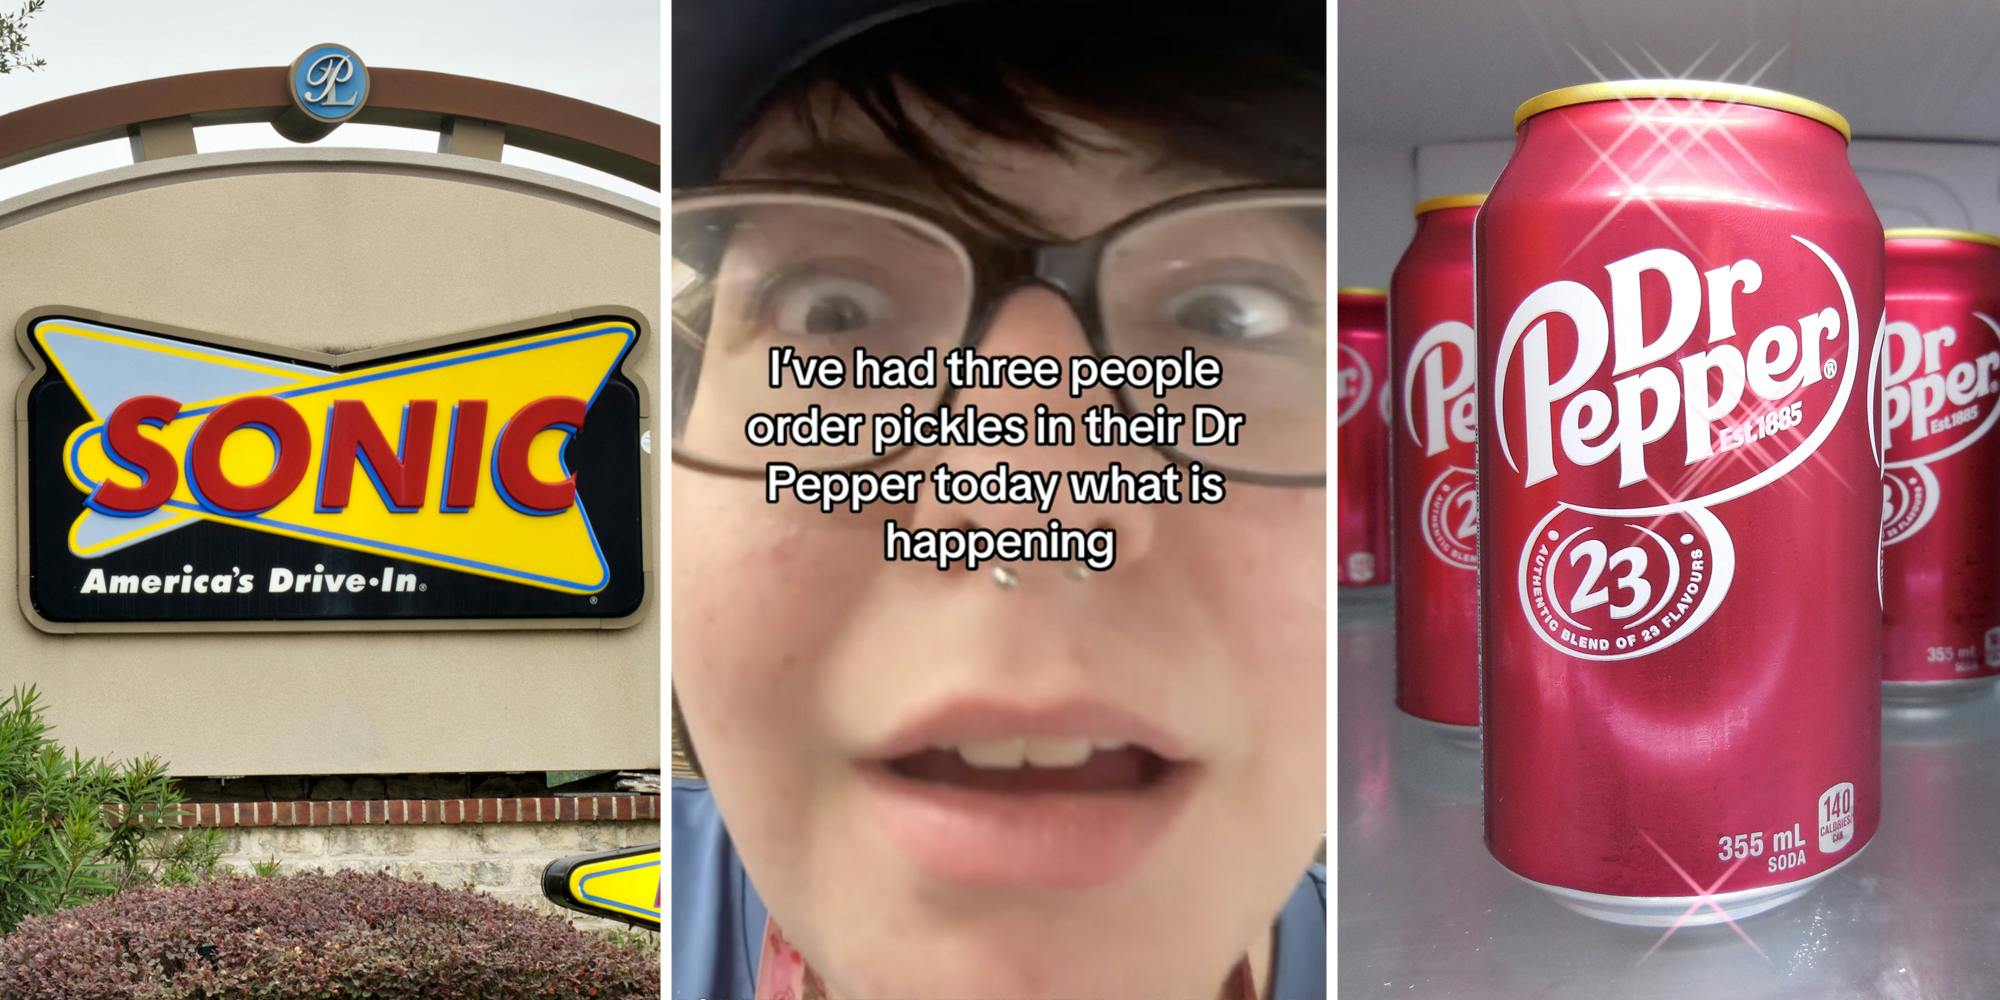 Sonic sign(l), Close up of face with text "I've had three people order pickles in their dr pepper today what is happening"(c), Dr Pepper cans(r)